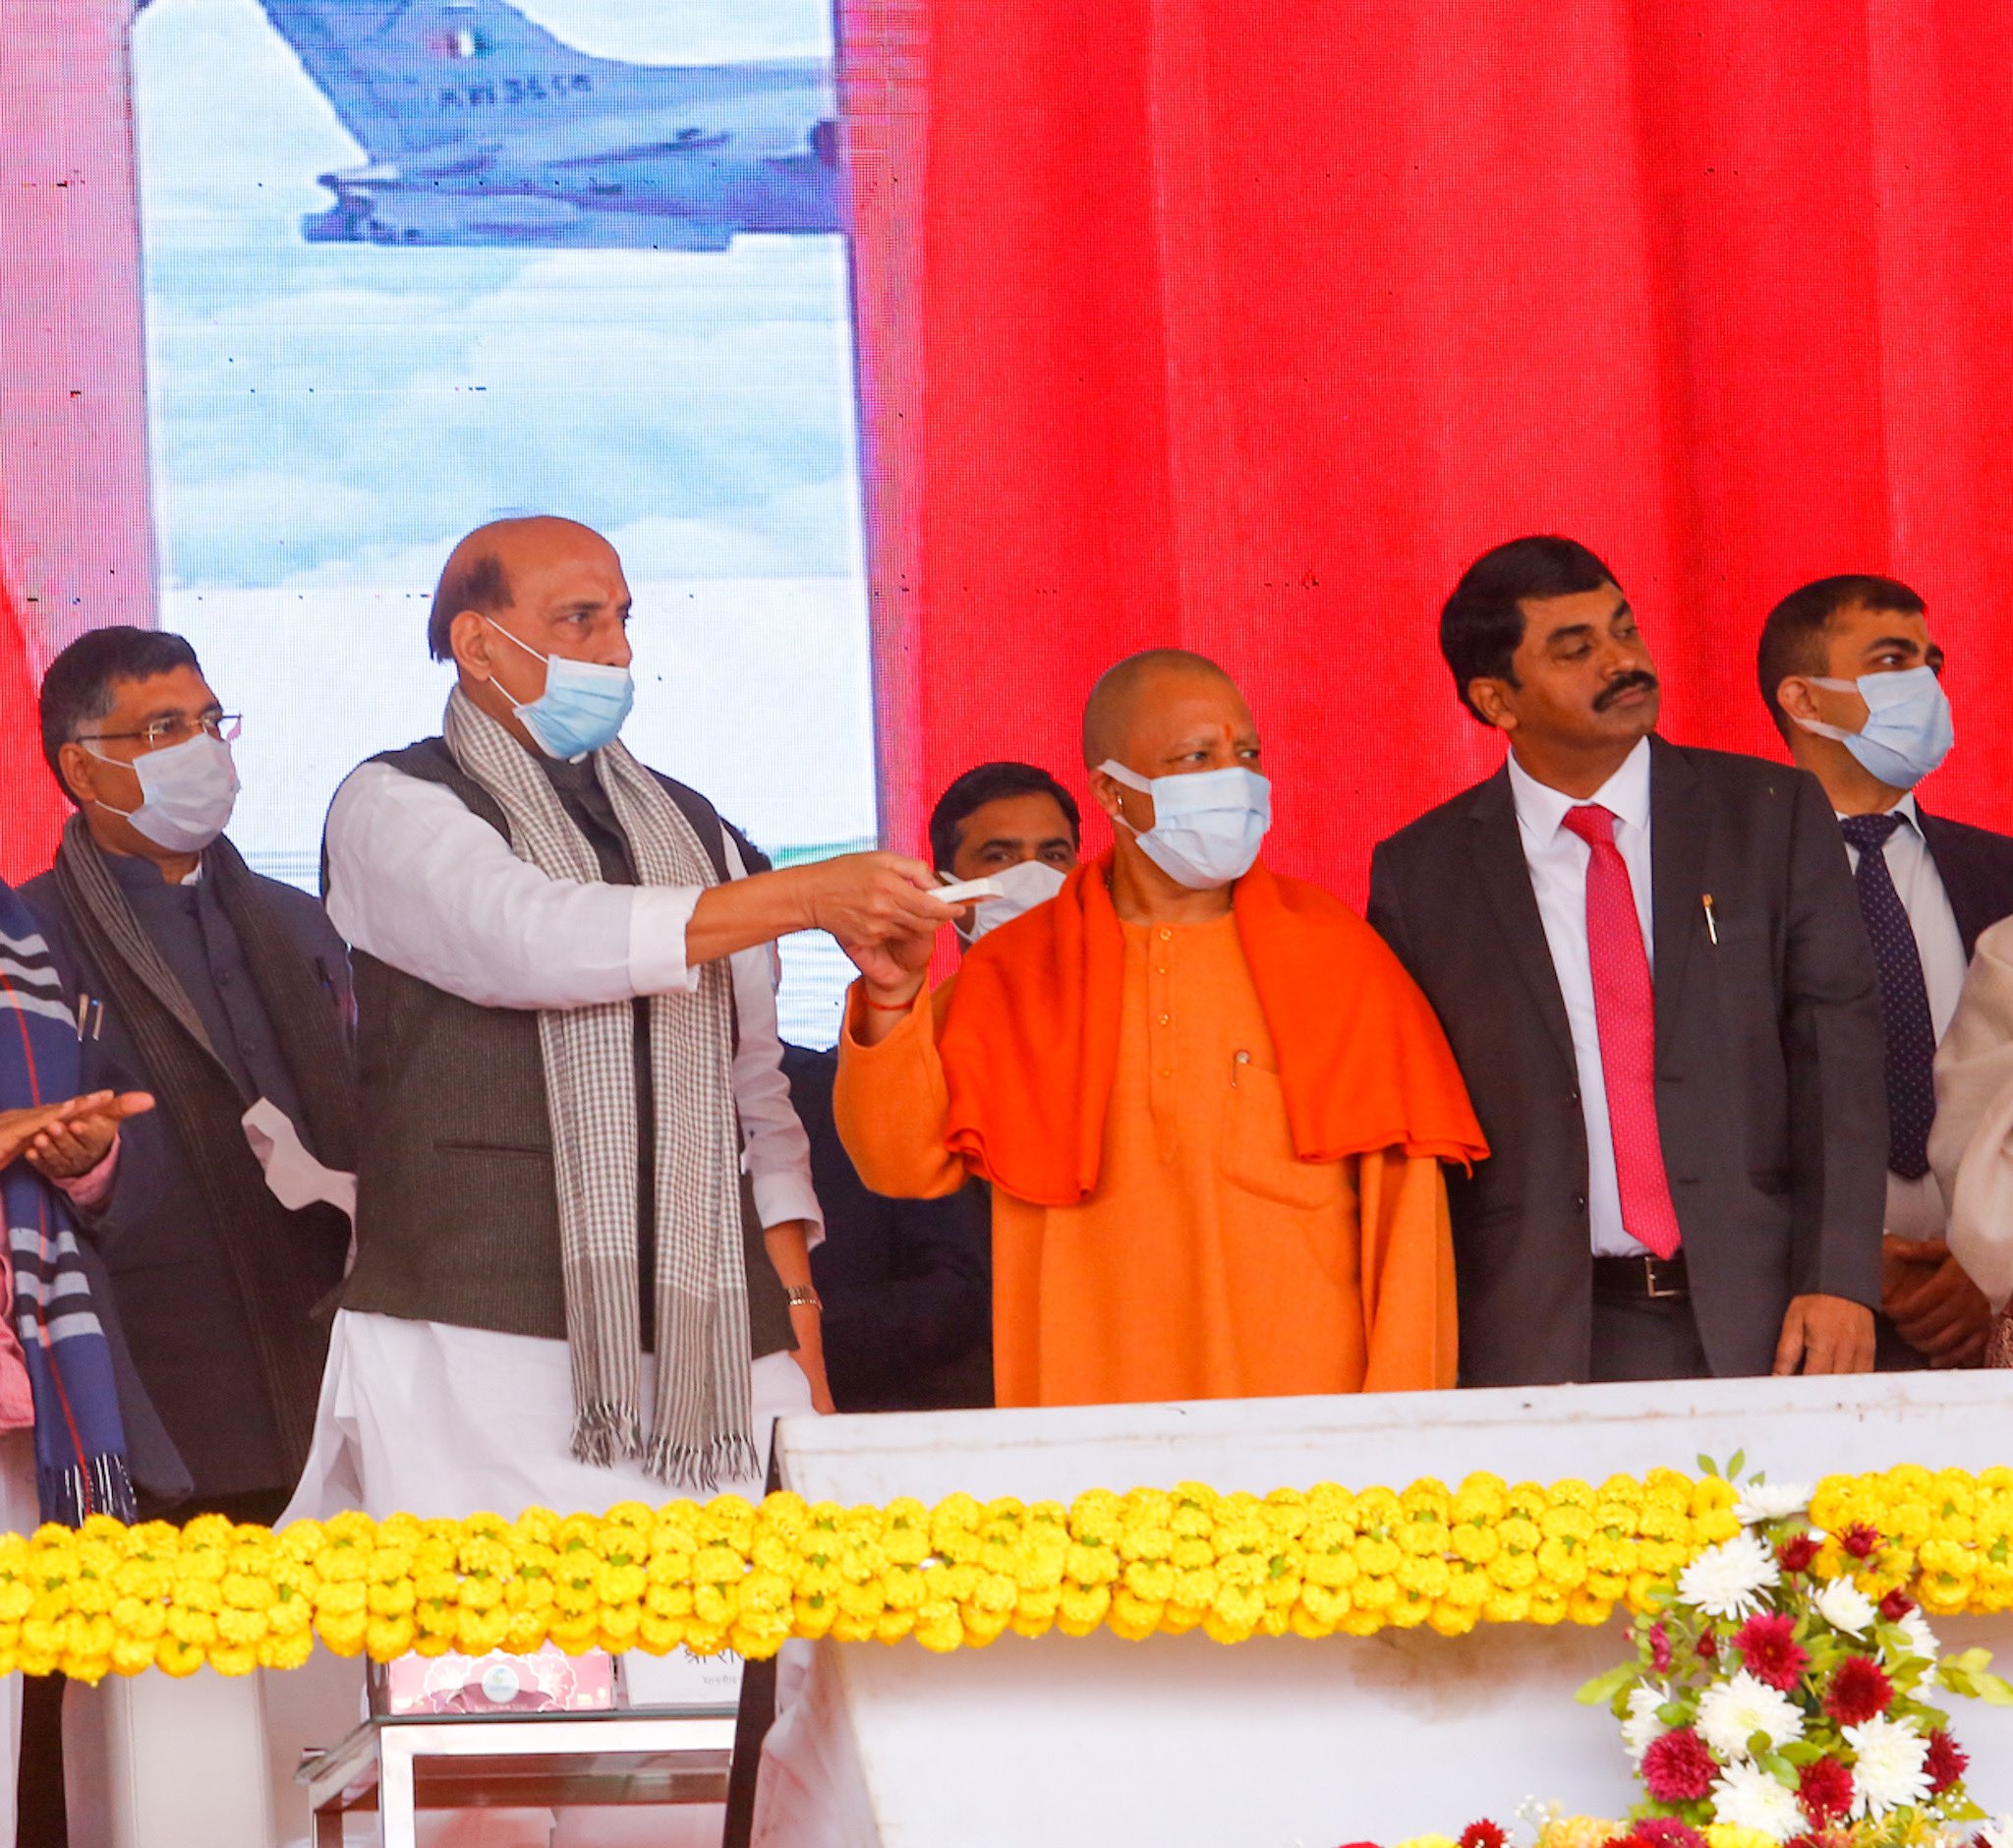 Foundation stone laying ceremony of DTTC & BrahMos Mfg Centre of DRDO